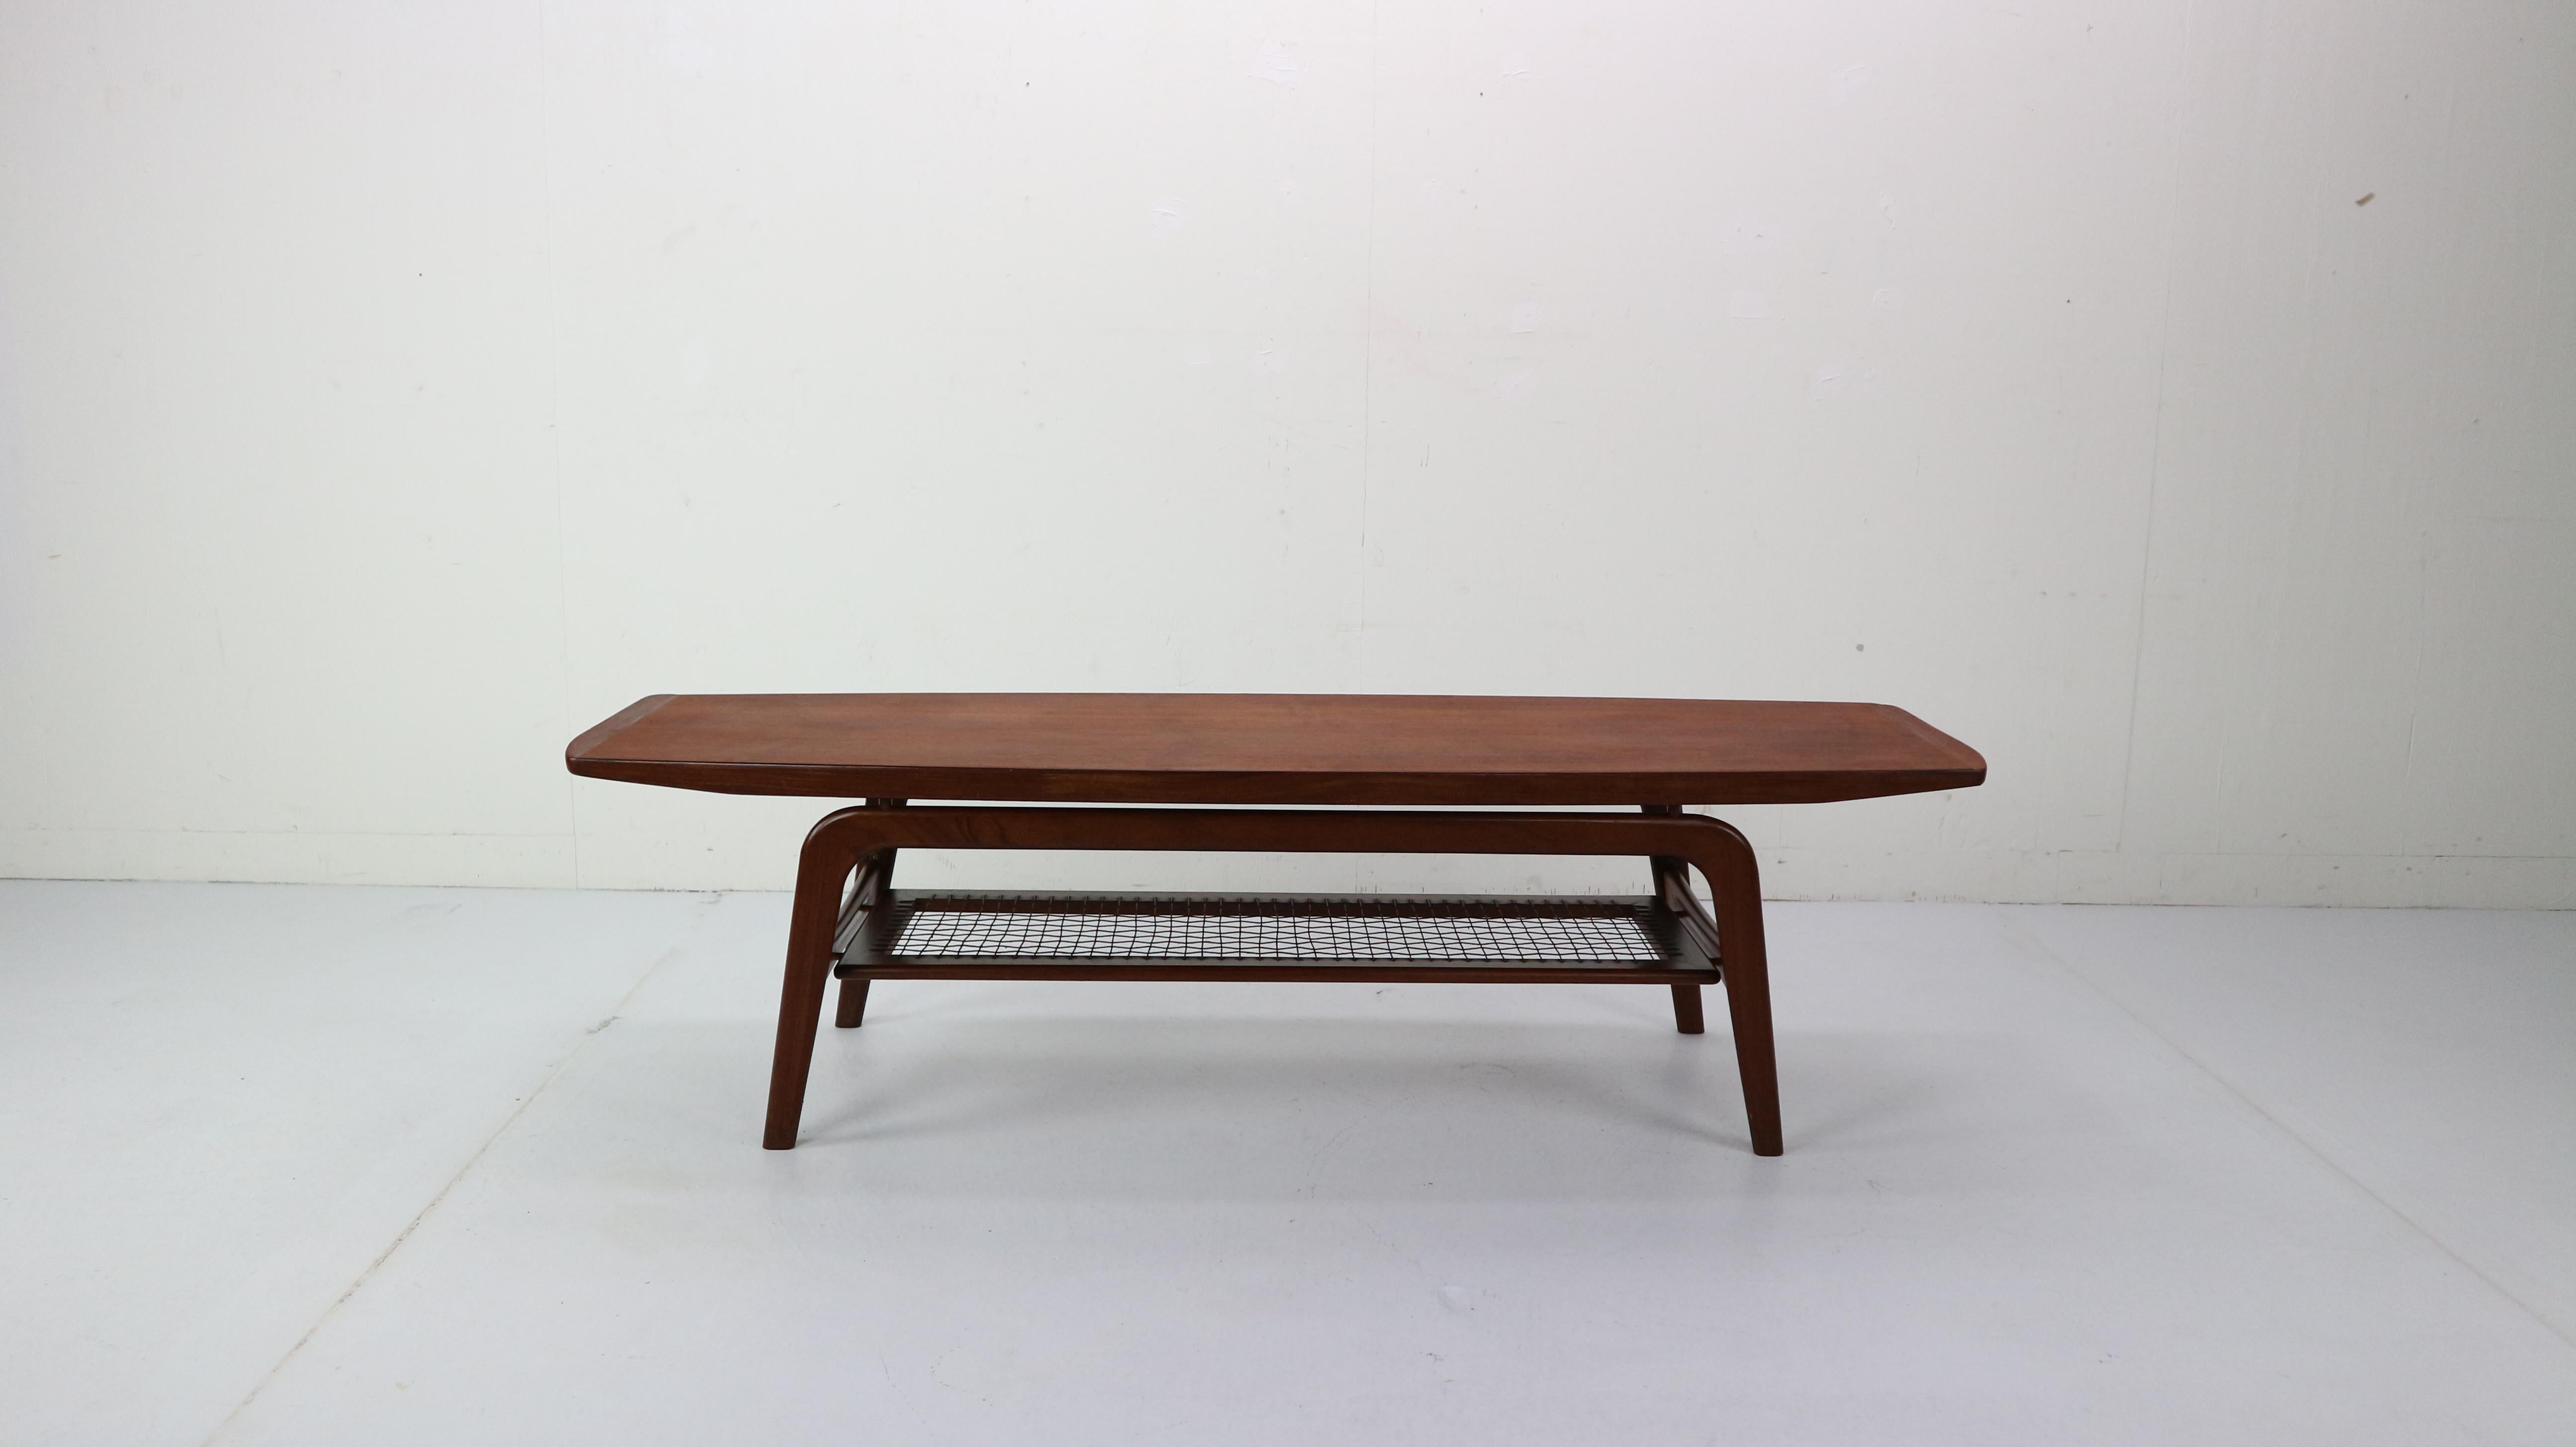 This Danish design pride teak wooden table is designed by famous Danish furniture designer Arne Hovmand-Olsen and manufactured by Mogens Koch in circa 1960s.

Arne Hovmand-Olsen's work is always marked by beautiful lines and sculptural shapes.